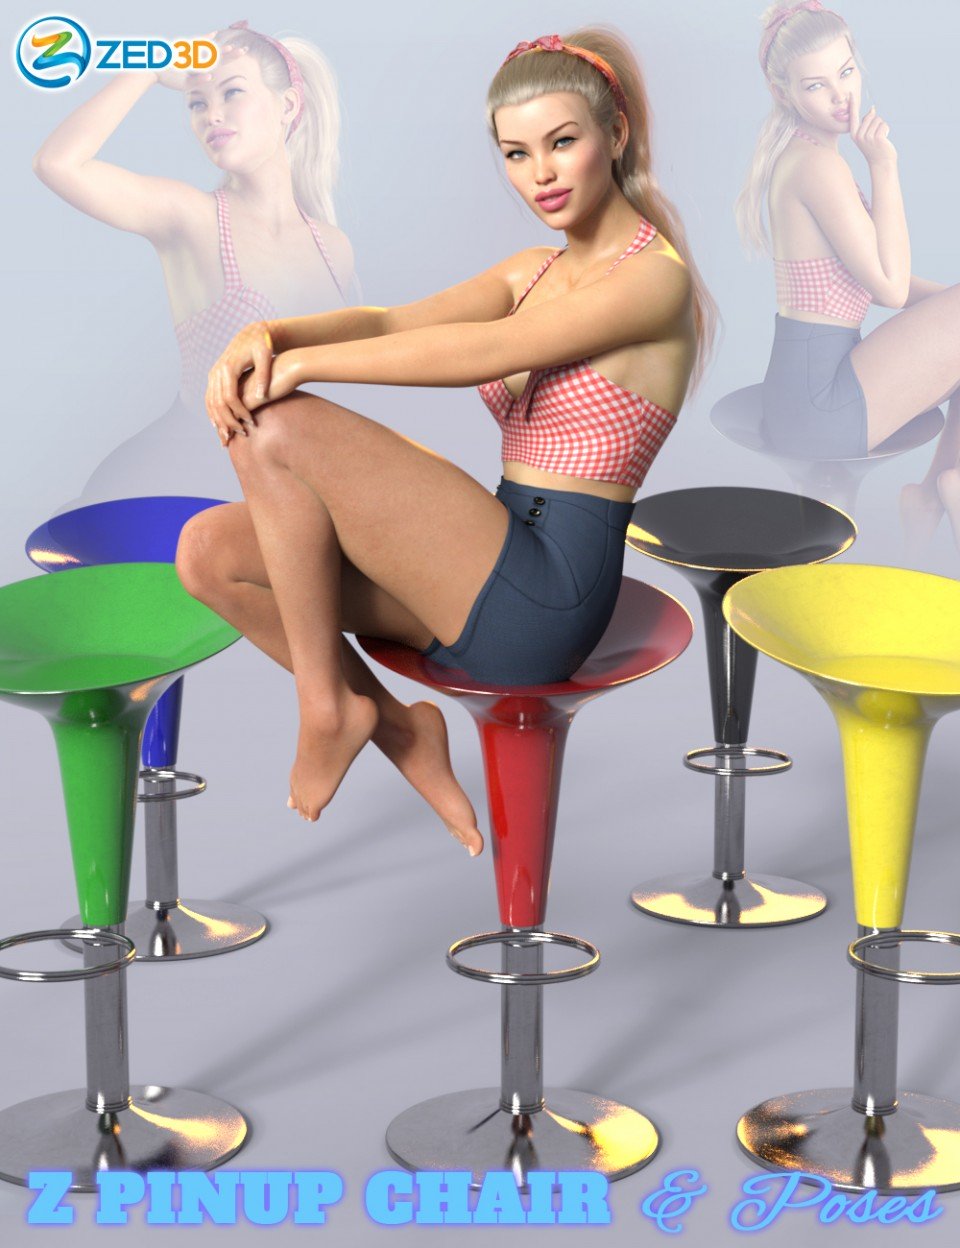 Z Pinup Chair and Poses G8F_DAZ3D下载站